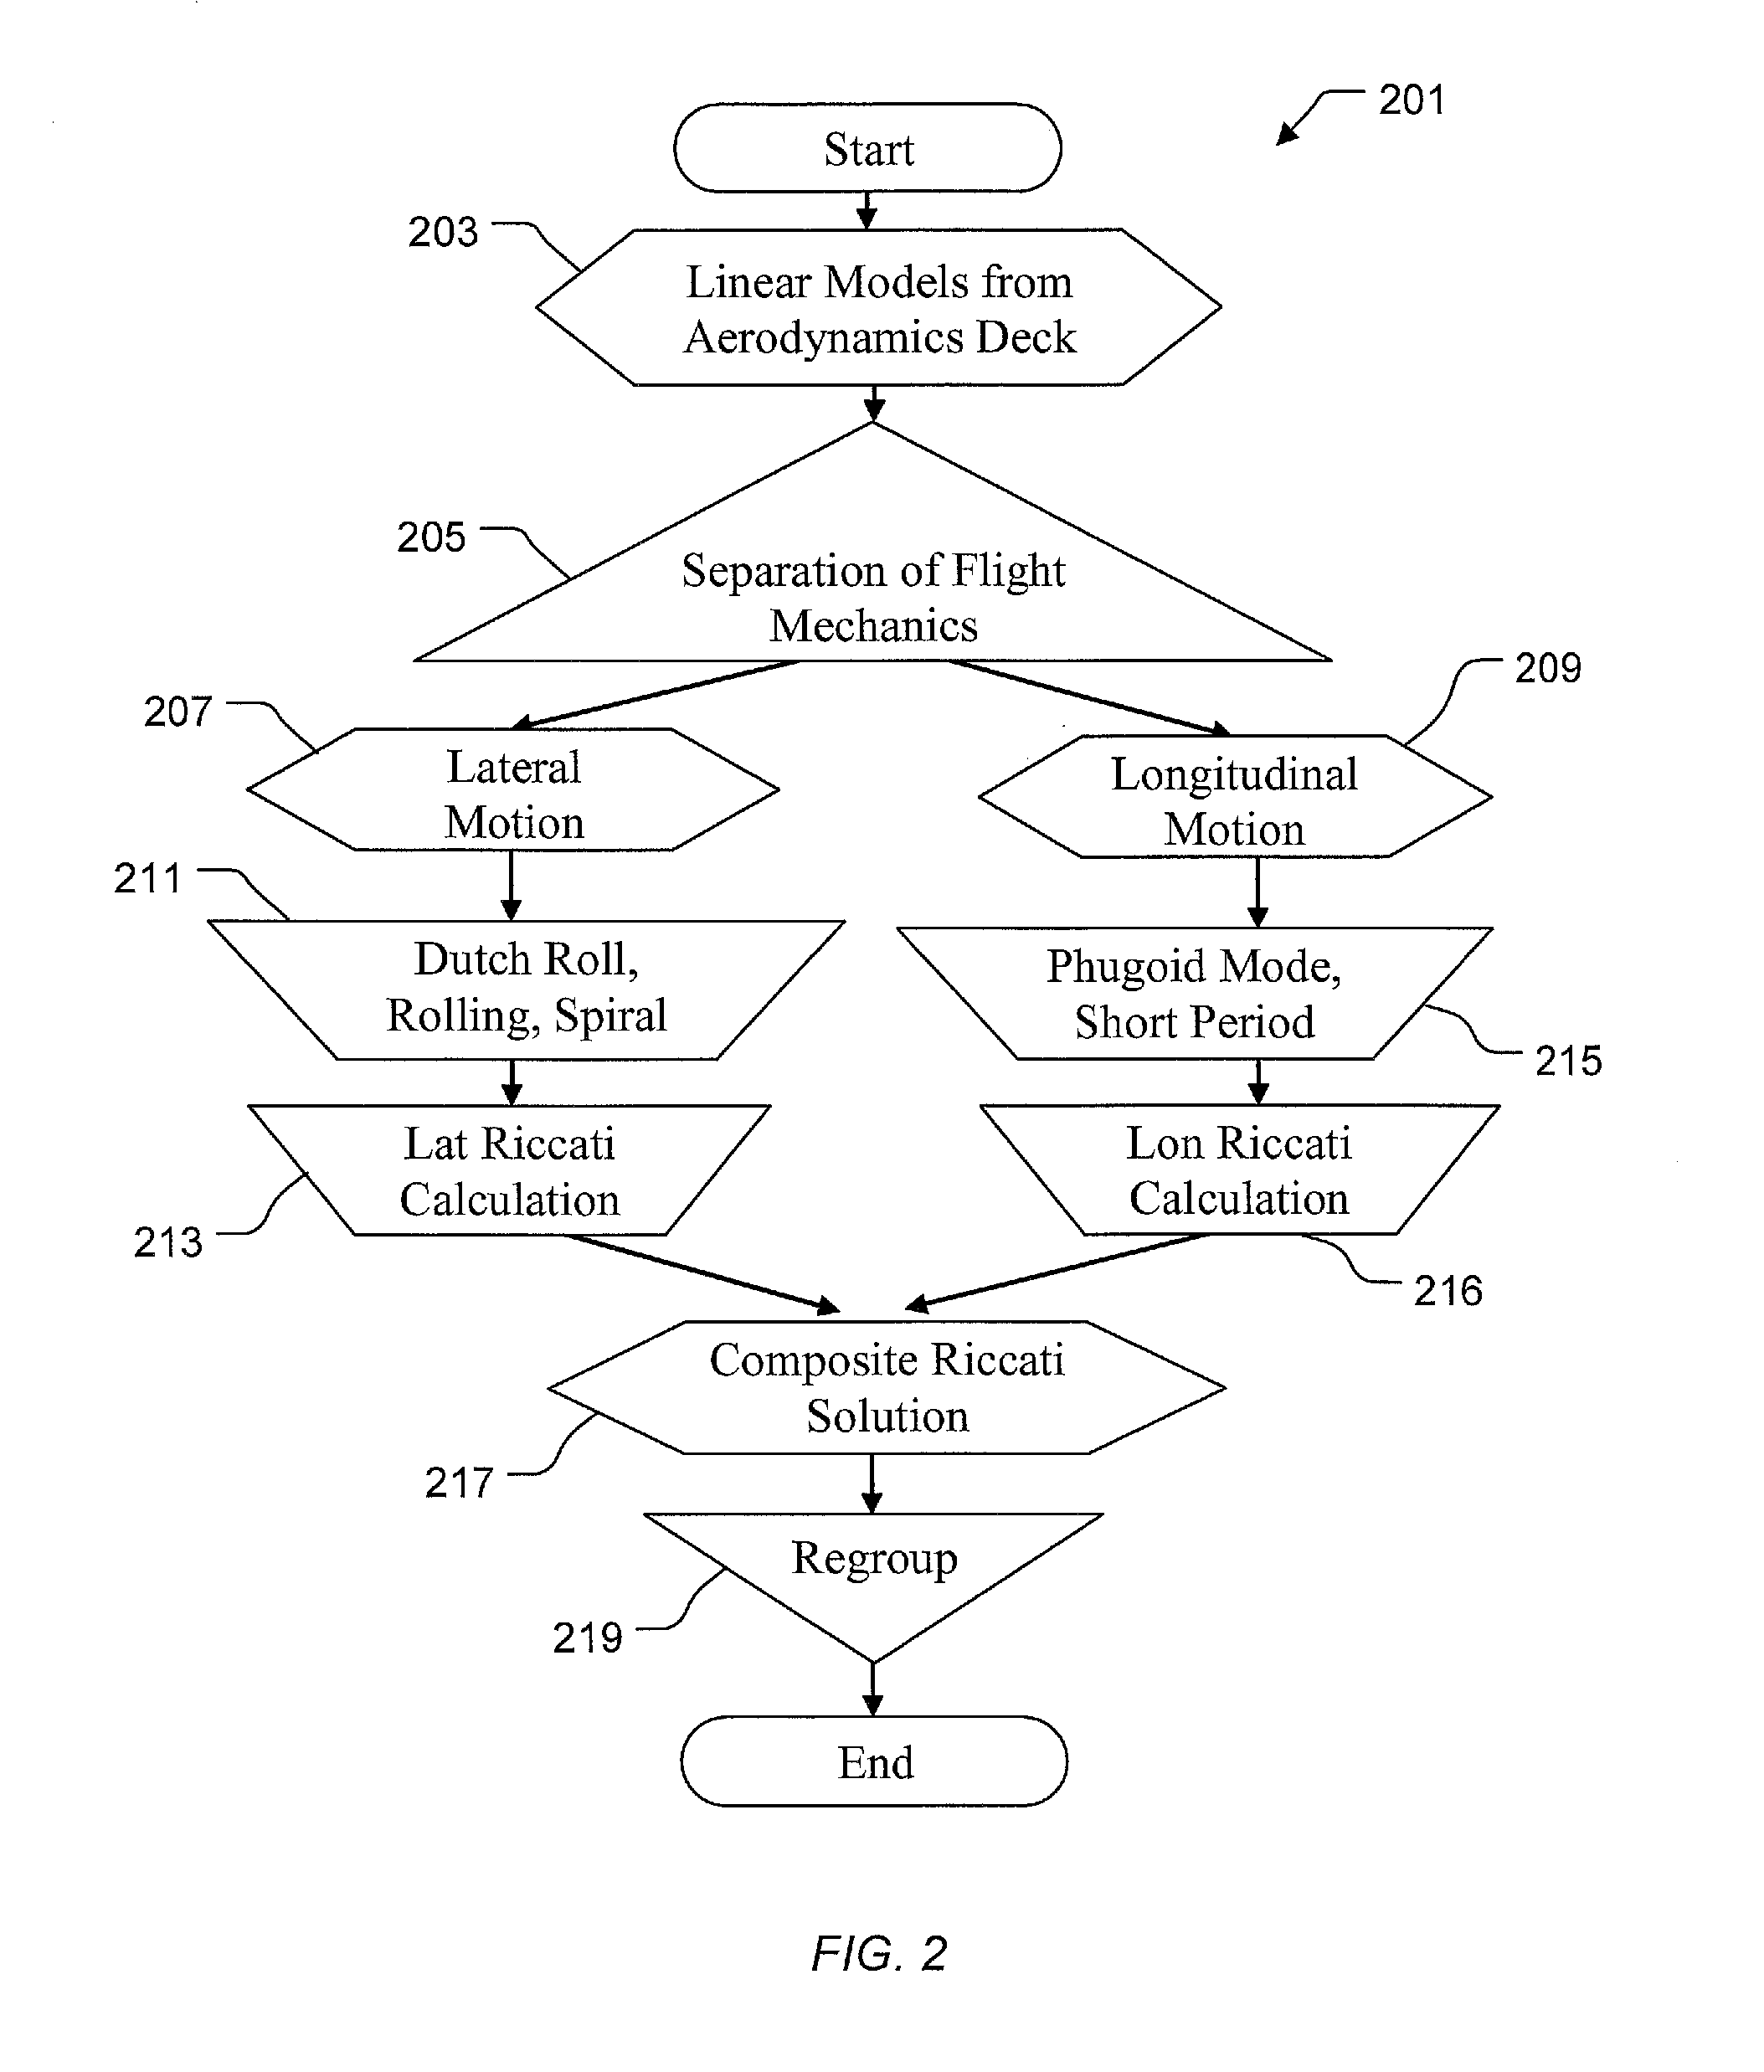 Extension of three loop control laws for system uncertainties, calculation time delay and command quickness